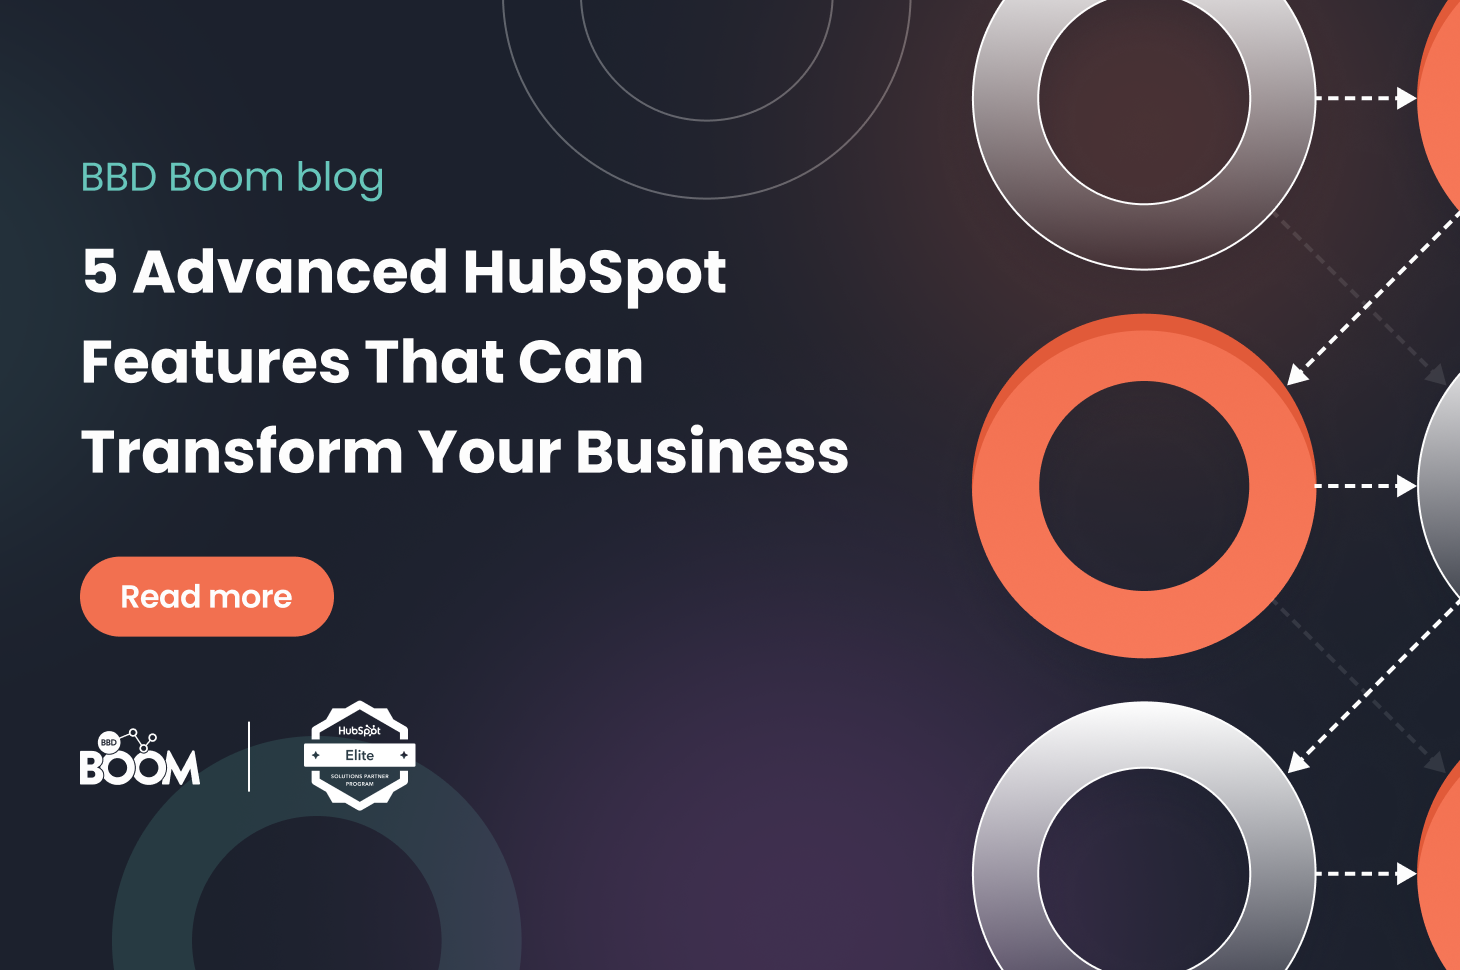 5 Advanced HubSpot Features That Can Transform Your Business